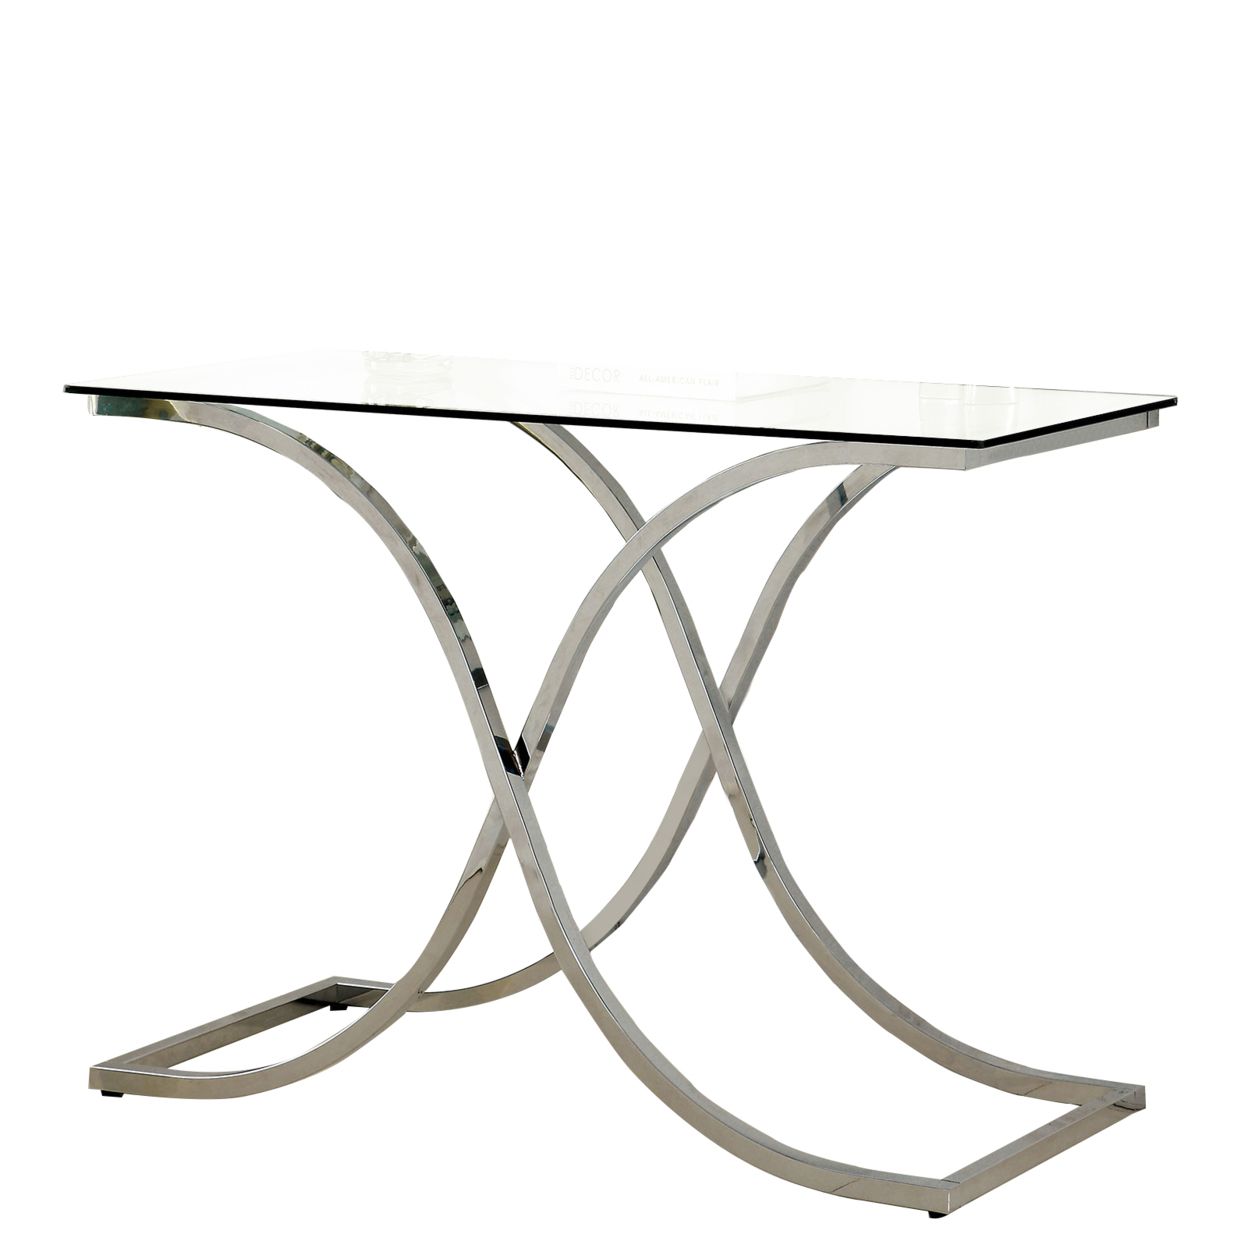 Modern Sofa Table With Glass Top And Curved Chrome Legs, Silver And Inside Antique Silver Aluminum Console Tables (View 8 of 20)